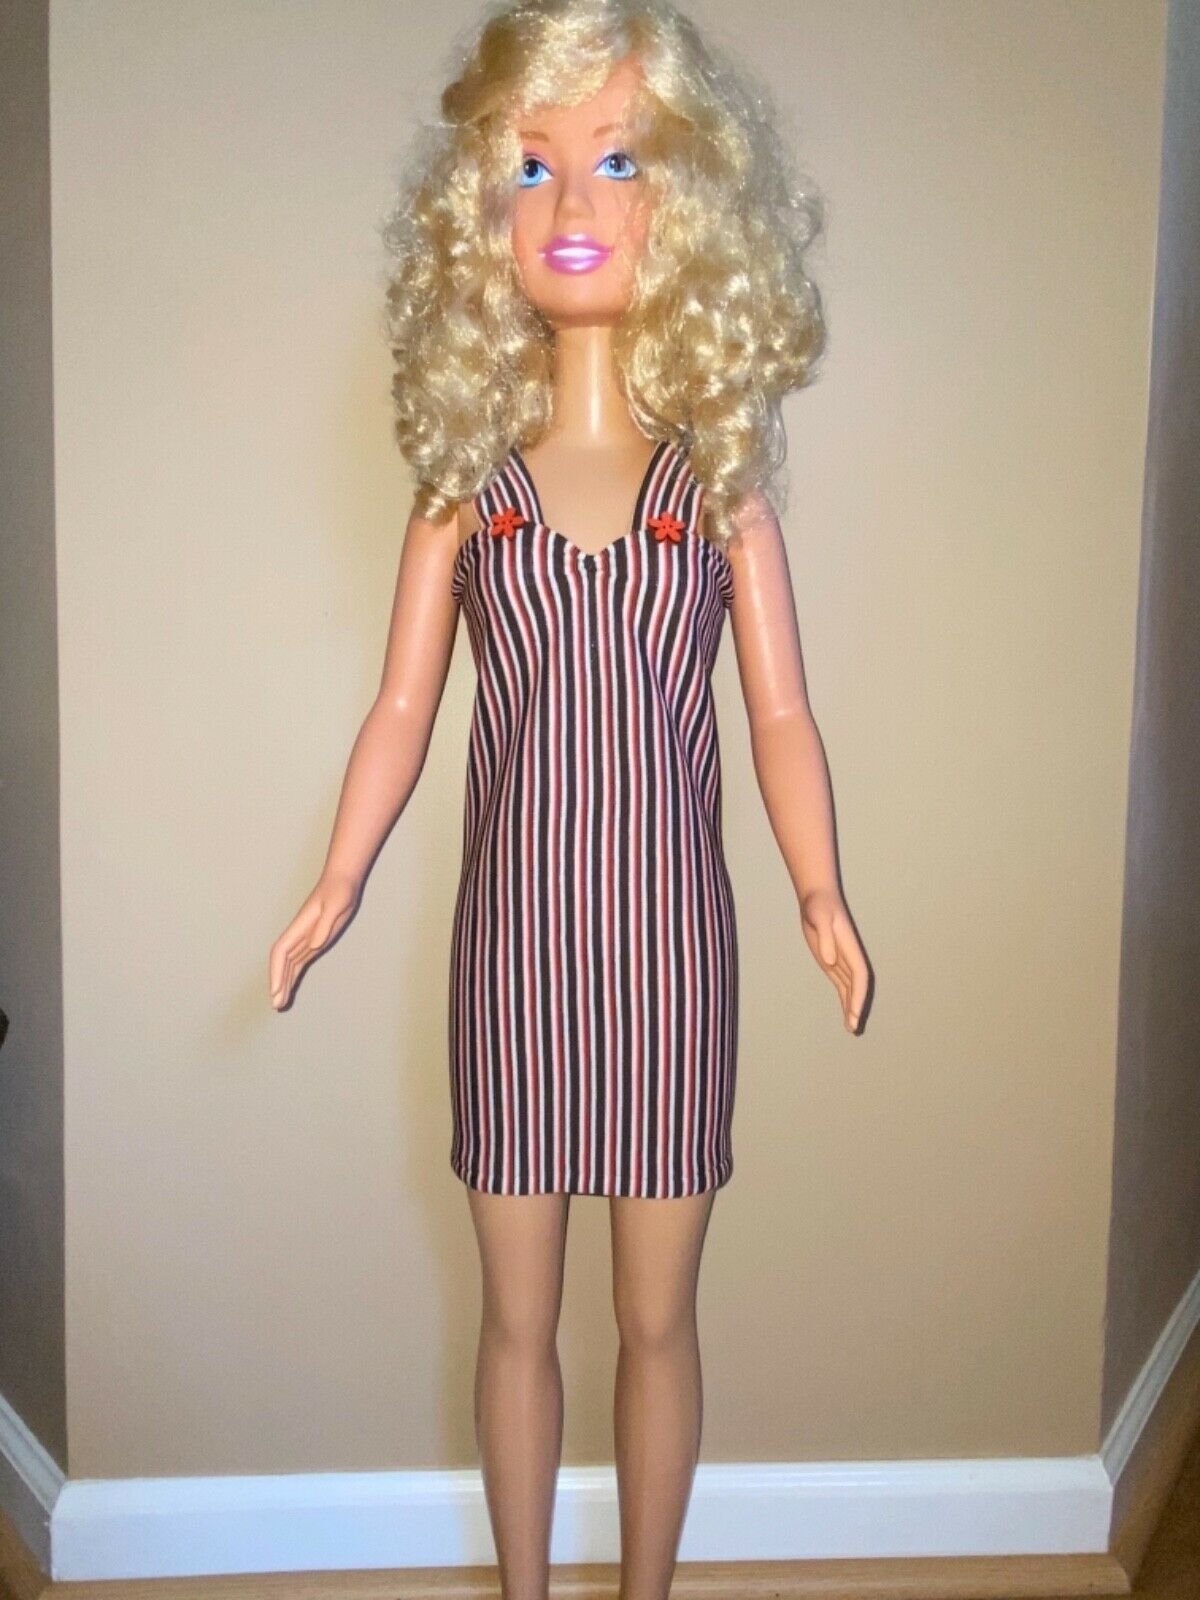 My Size Barbie Clothes-36 Inch- Fall Colors Stripe Sundress